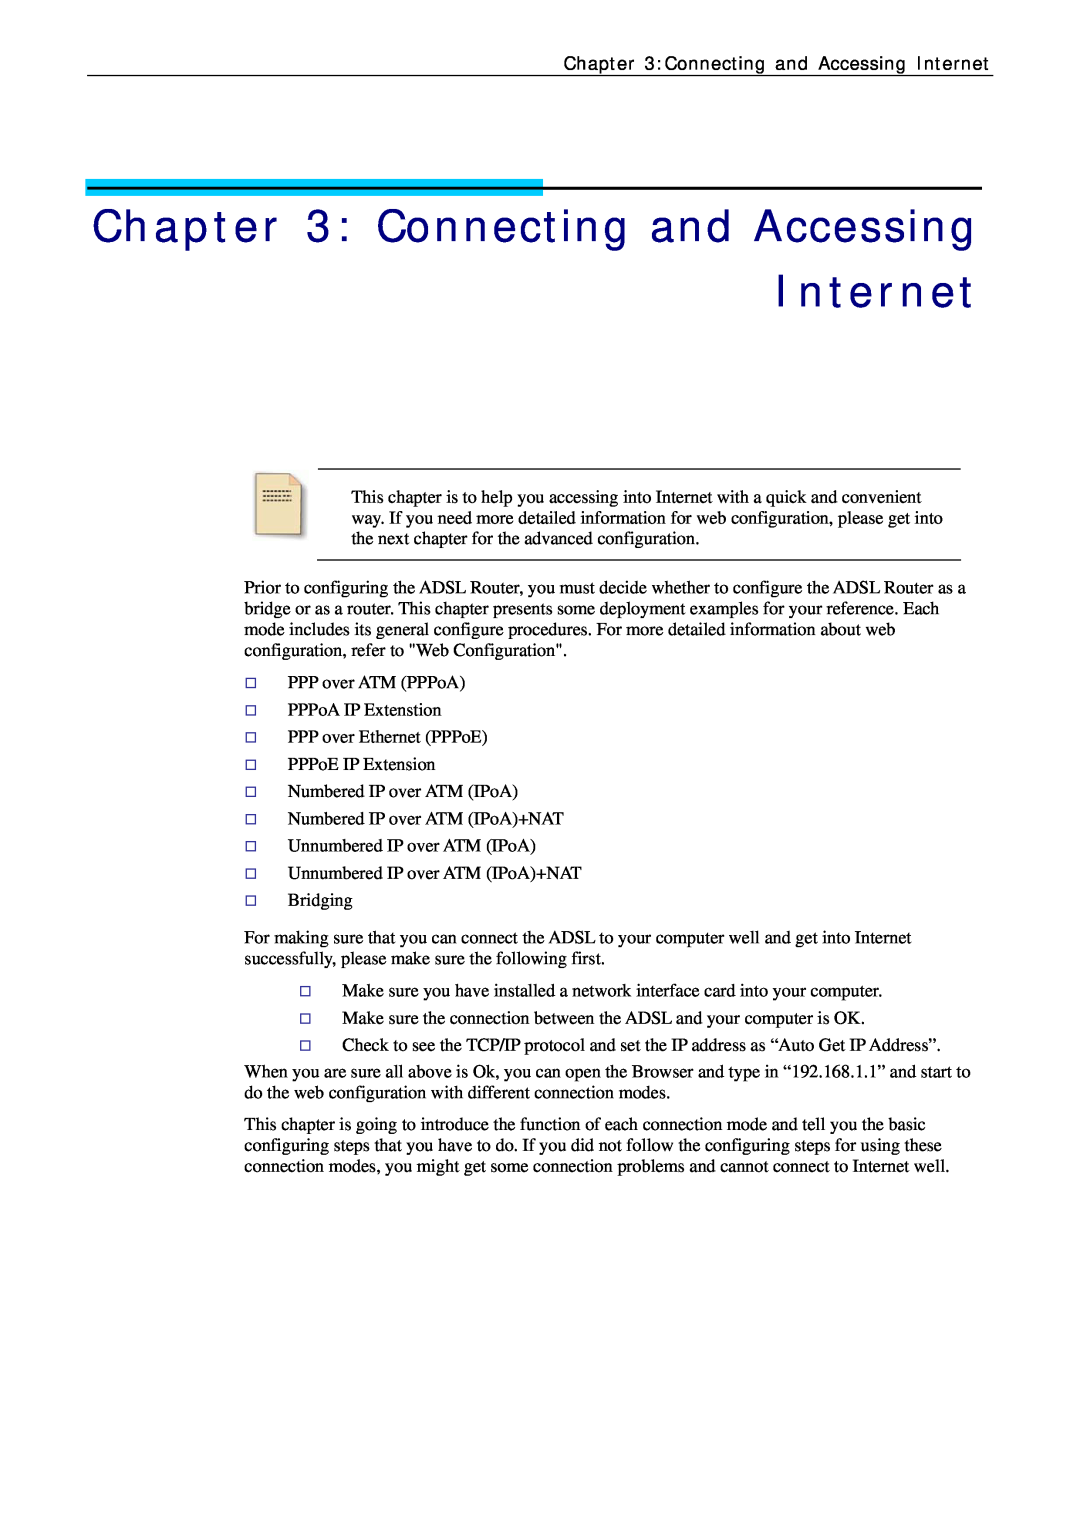 Siemens CL-010-I manual Connecting and Accessing Internet 